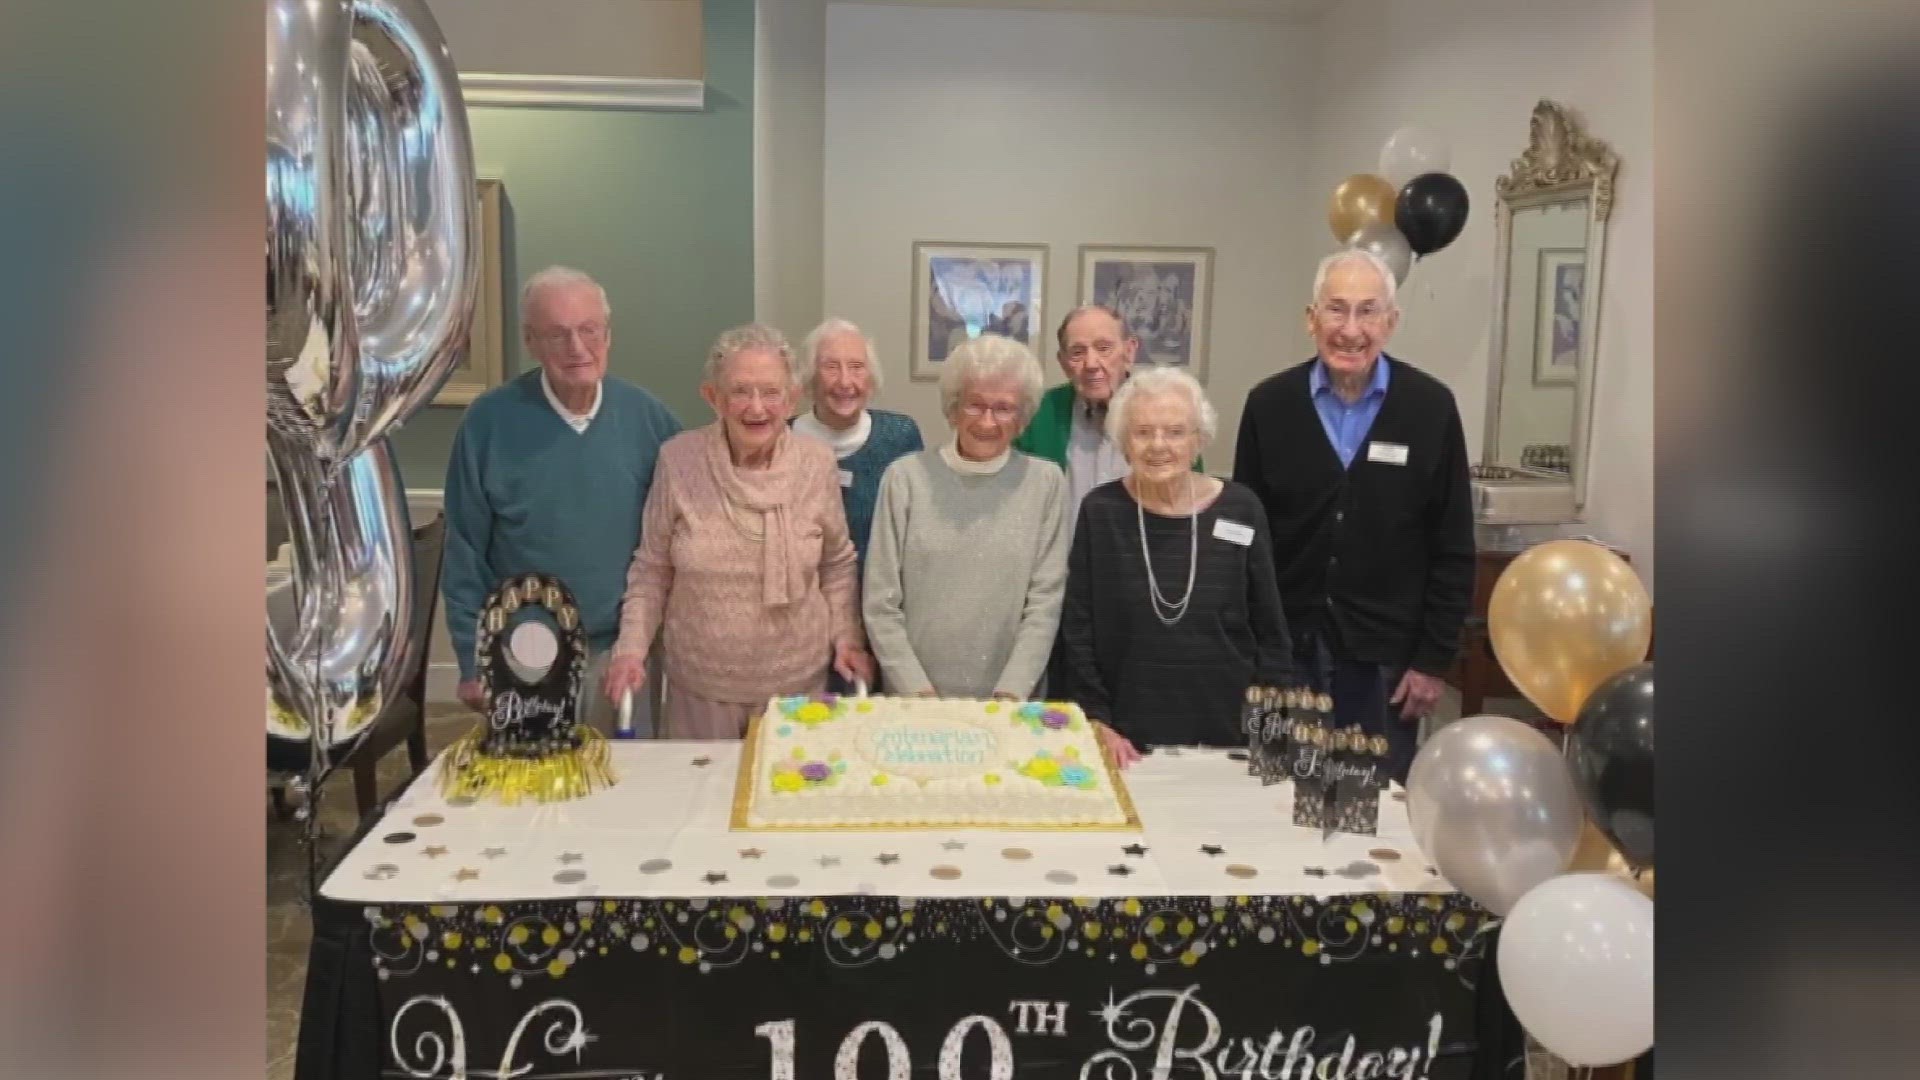 Six people celebrated their birthdays. The youngest was 100, and the oldest was 106!